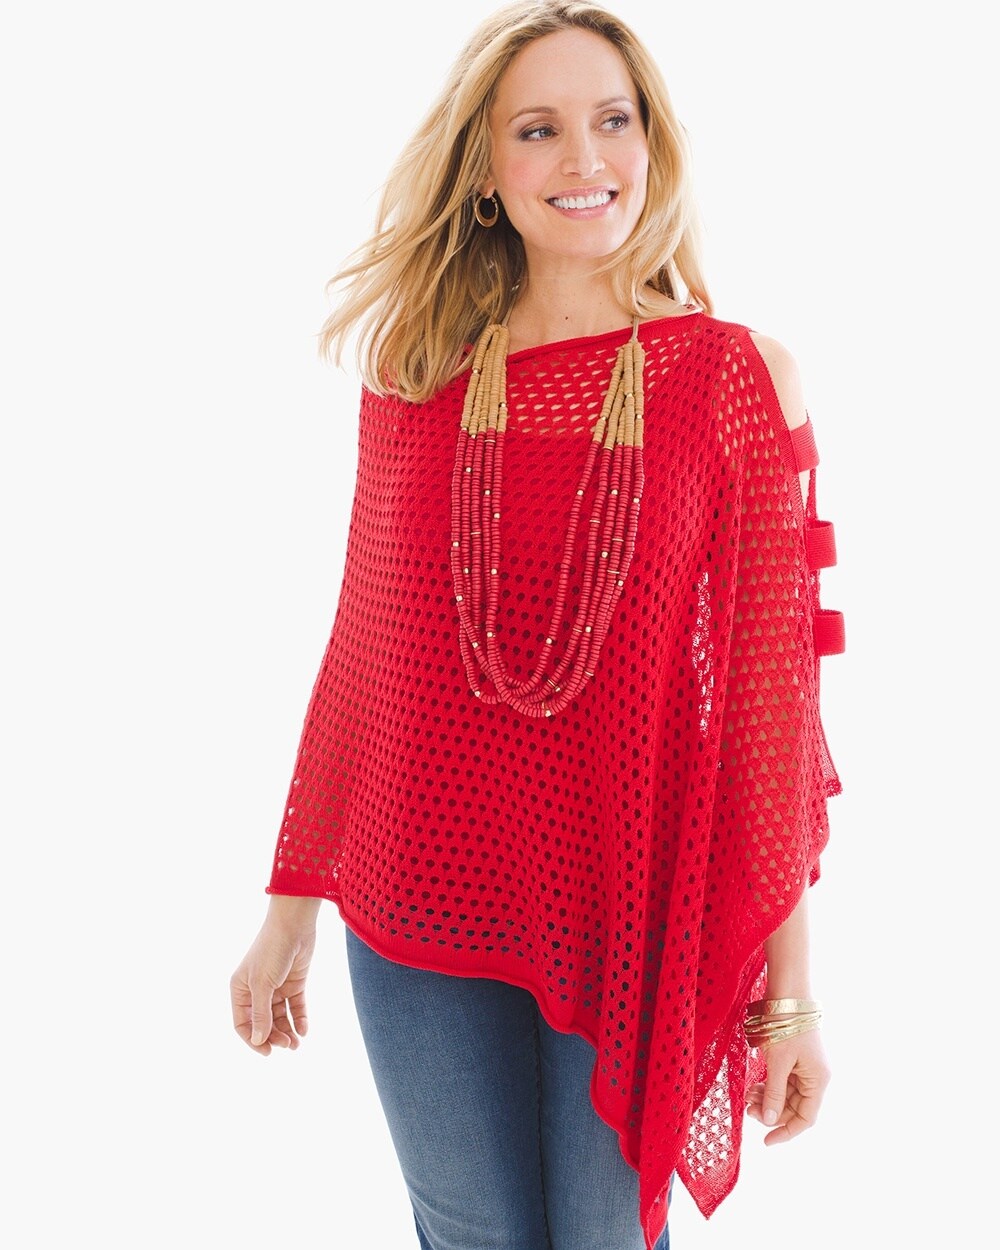 Penny Perforated Poncho in Runaway Red